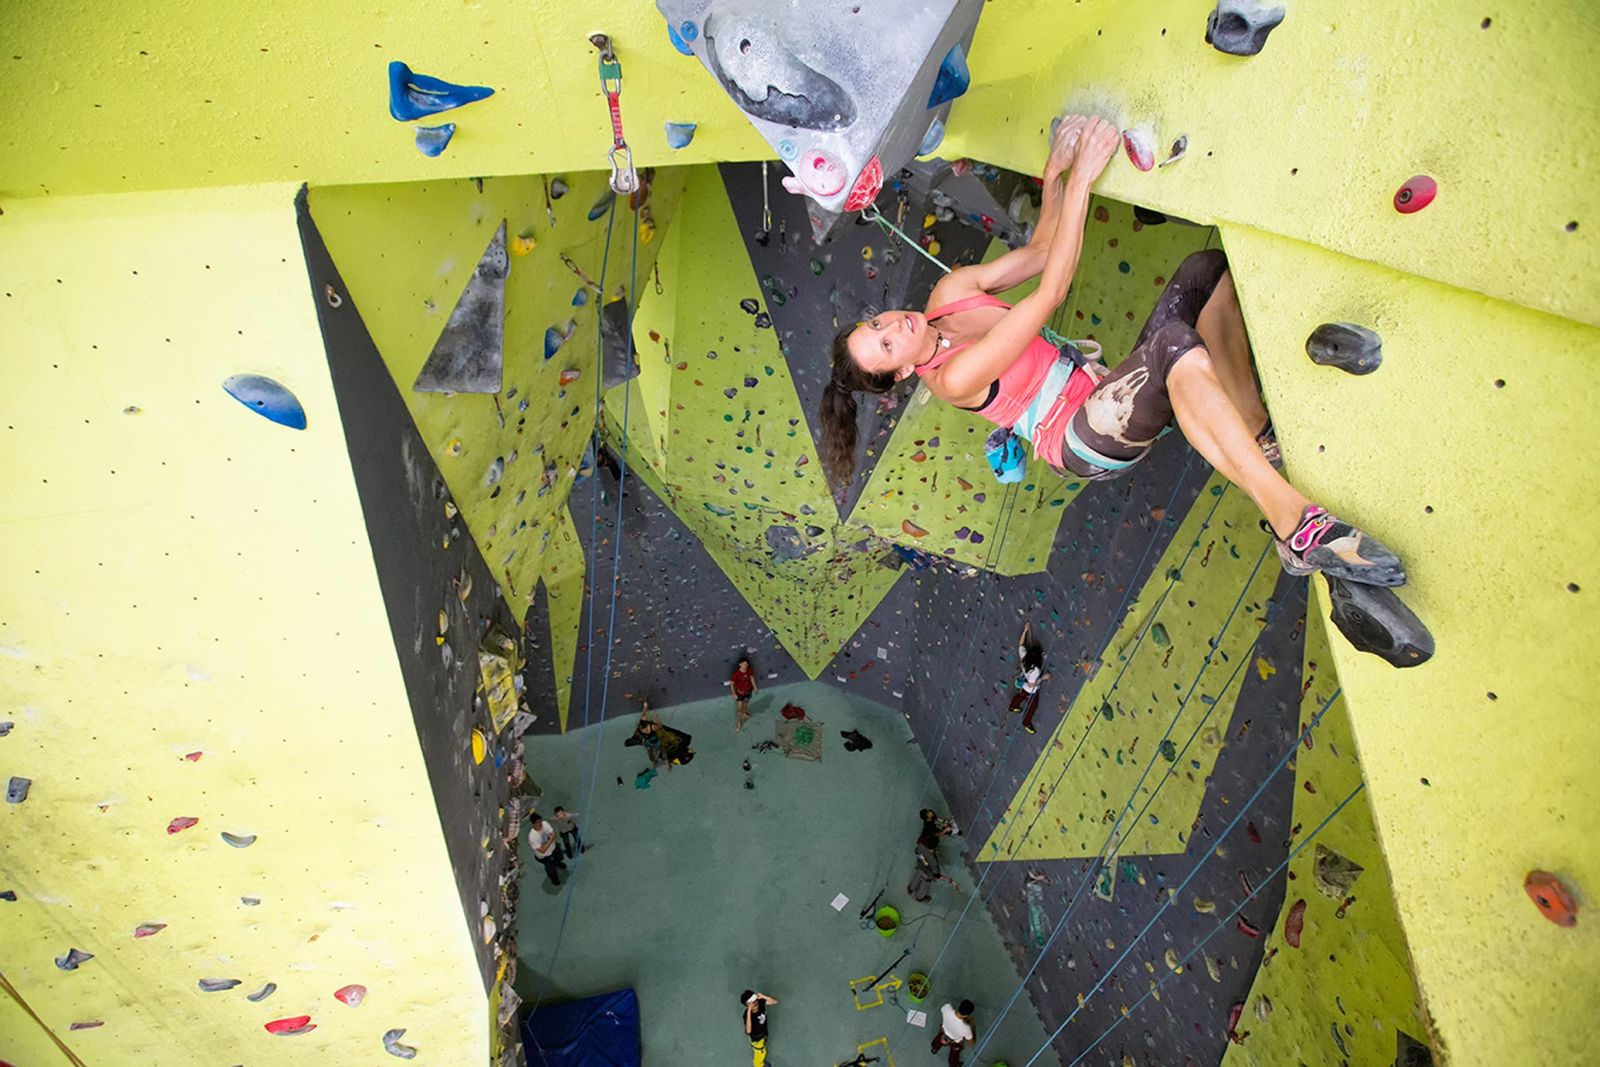 Woman rope climbing on a bright green wall